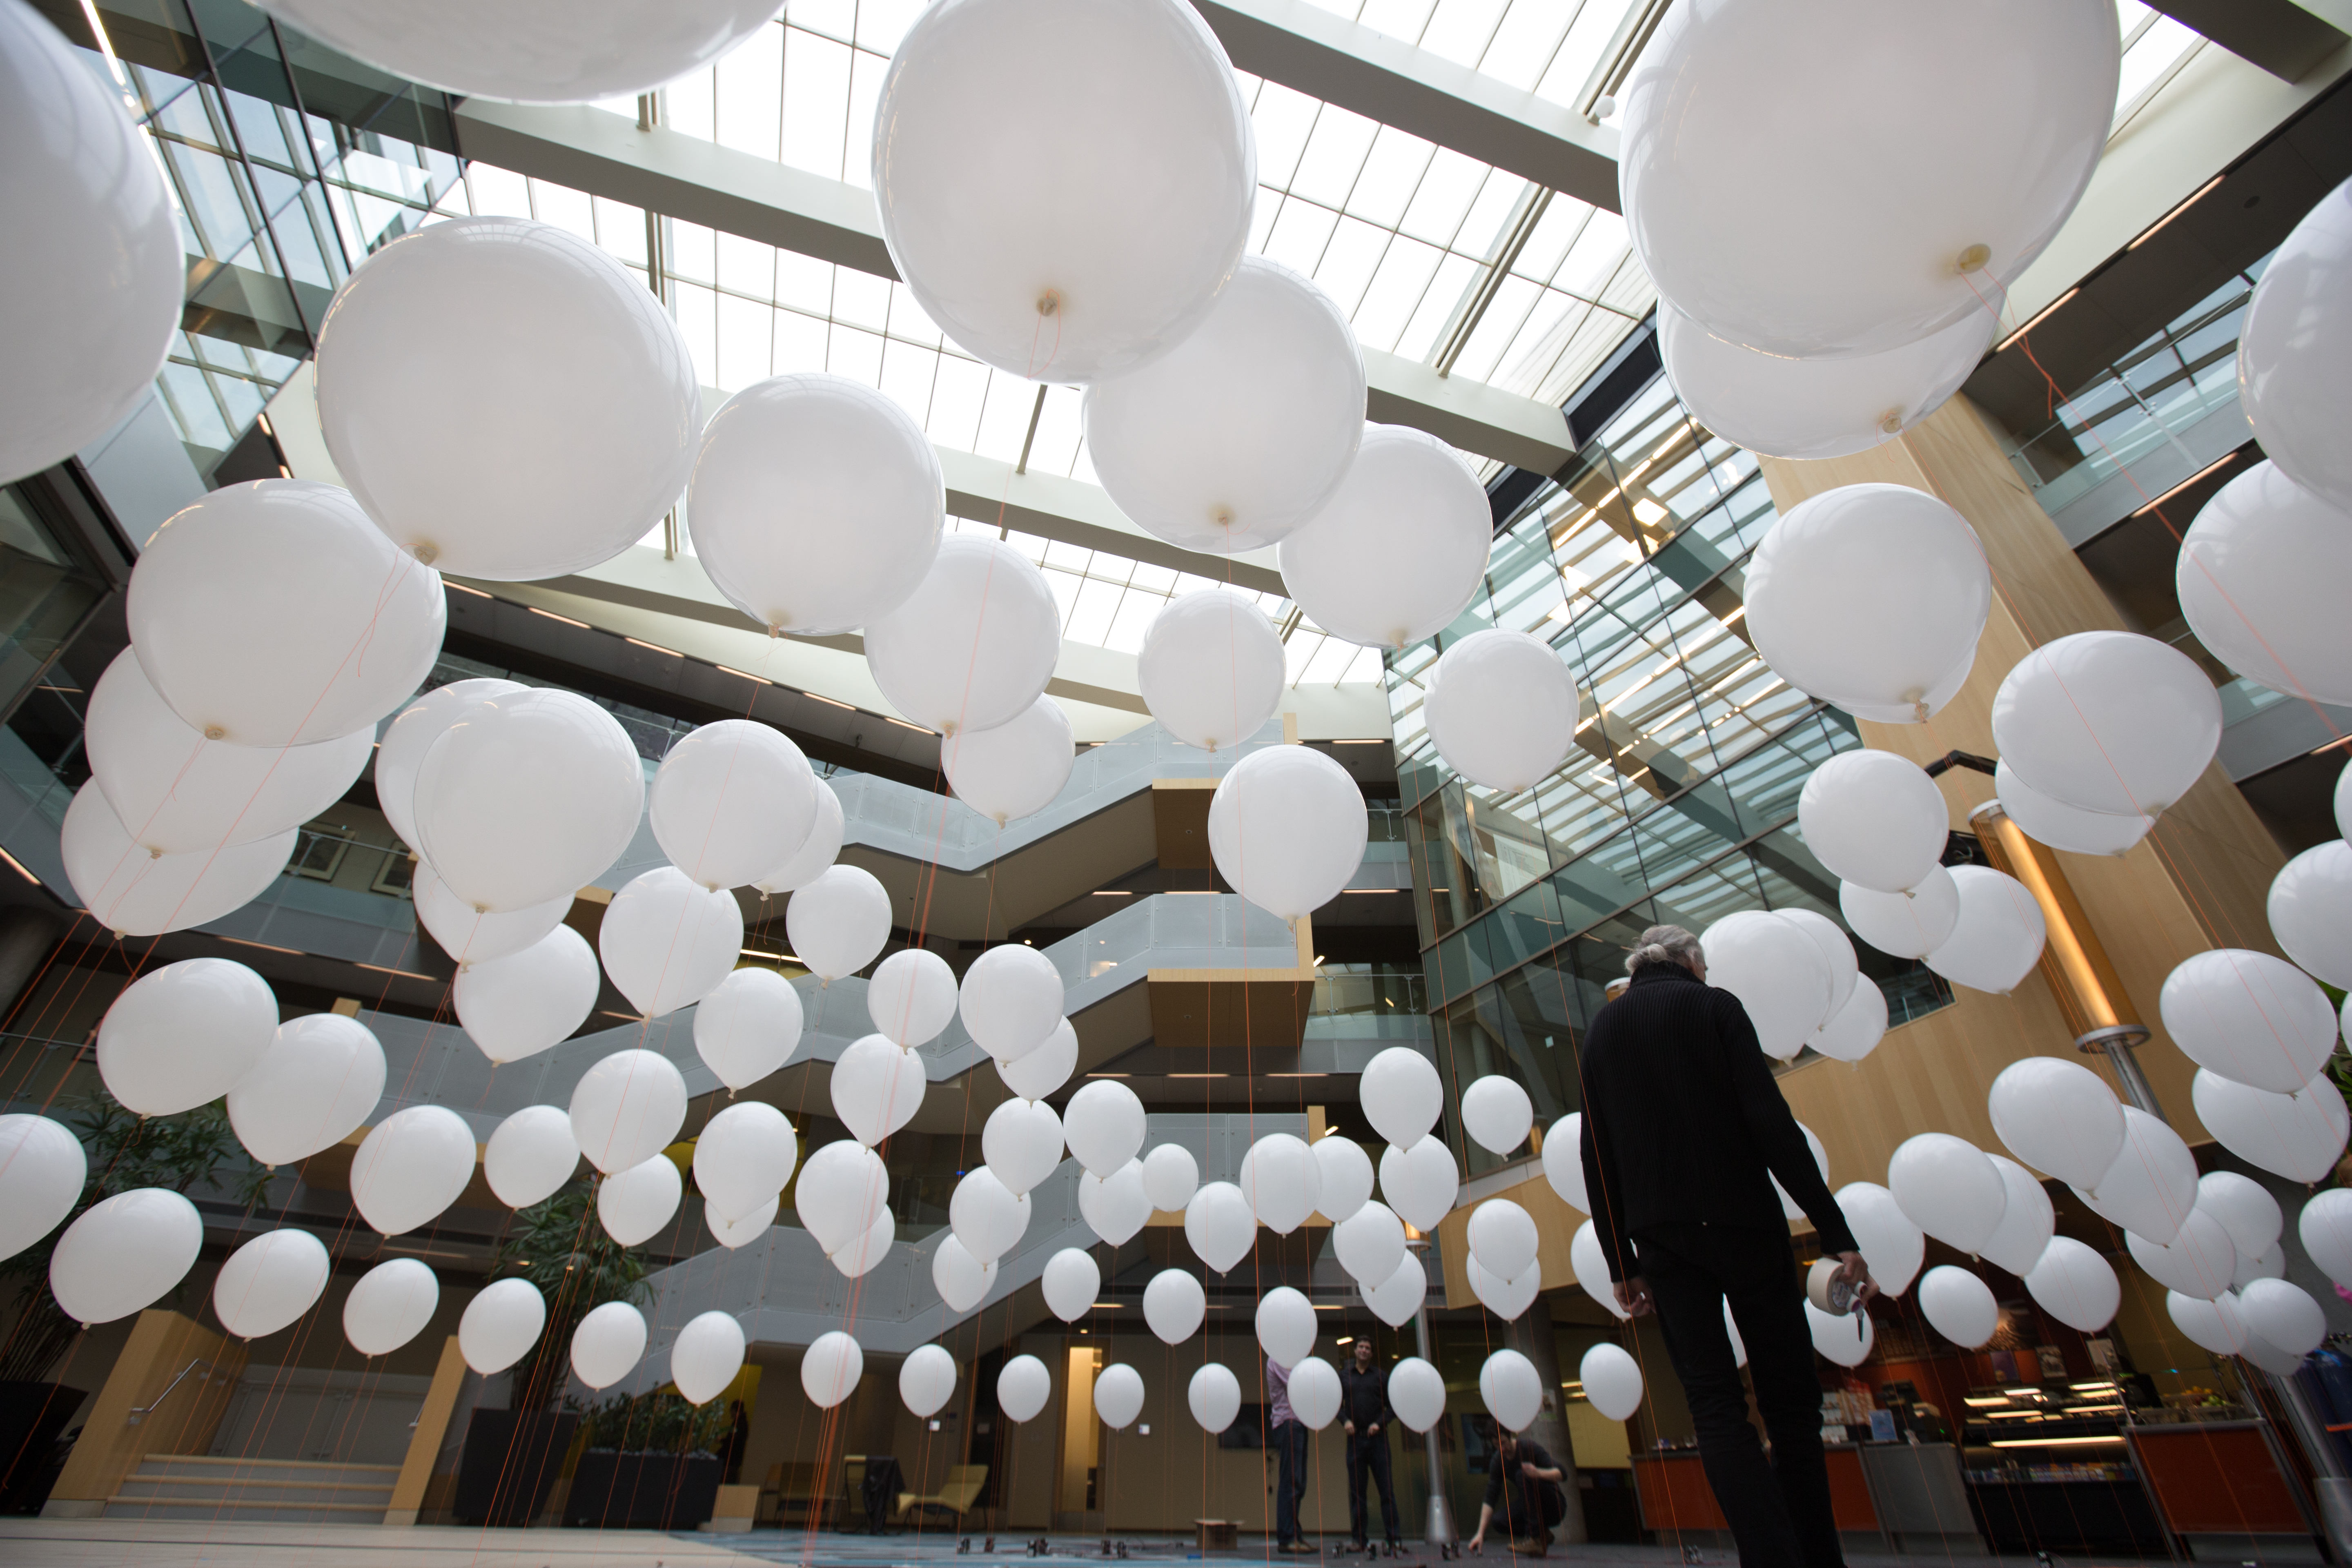 Balloons from Disparity installation